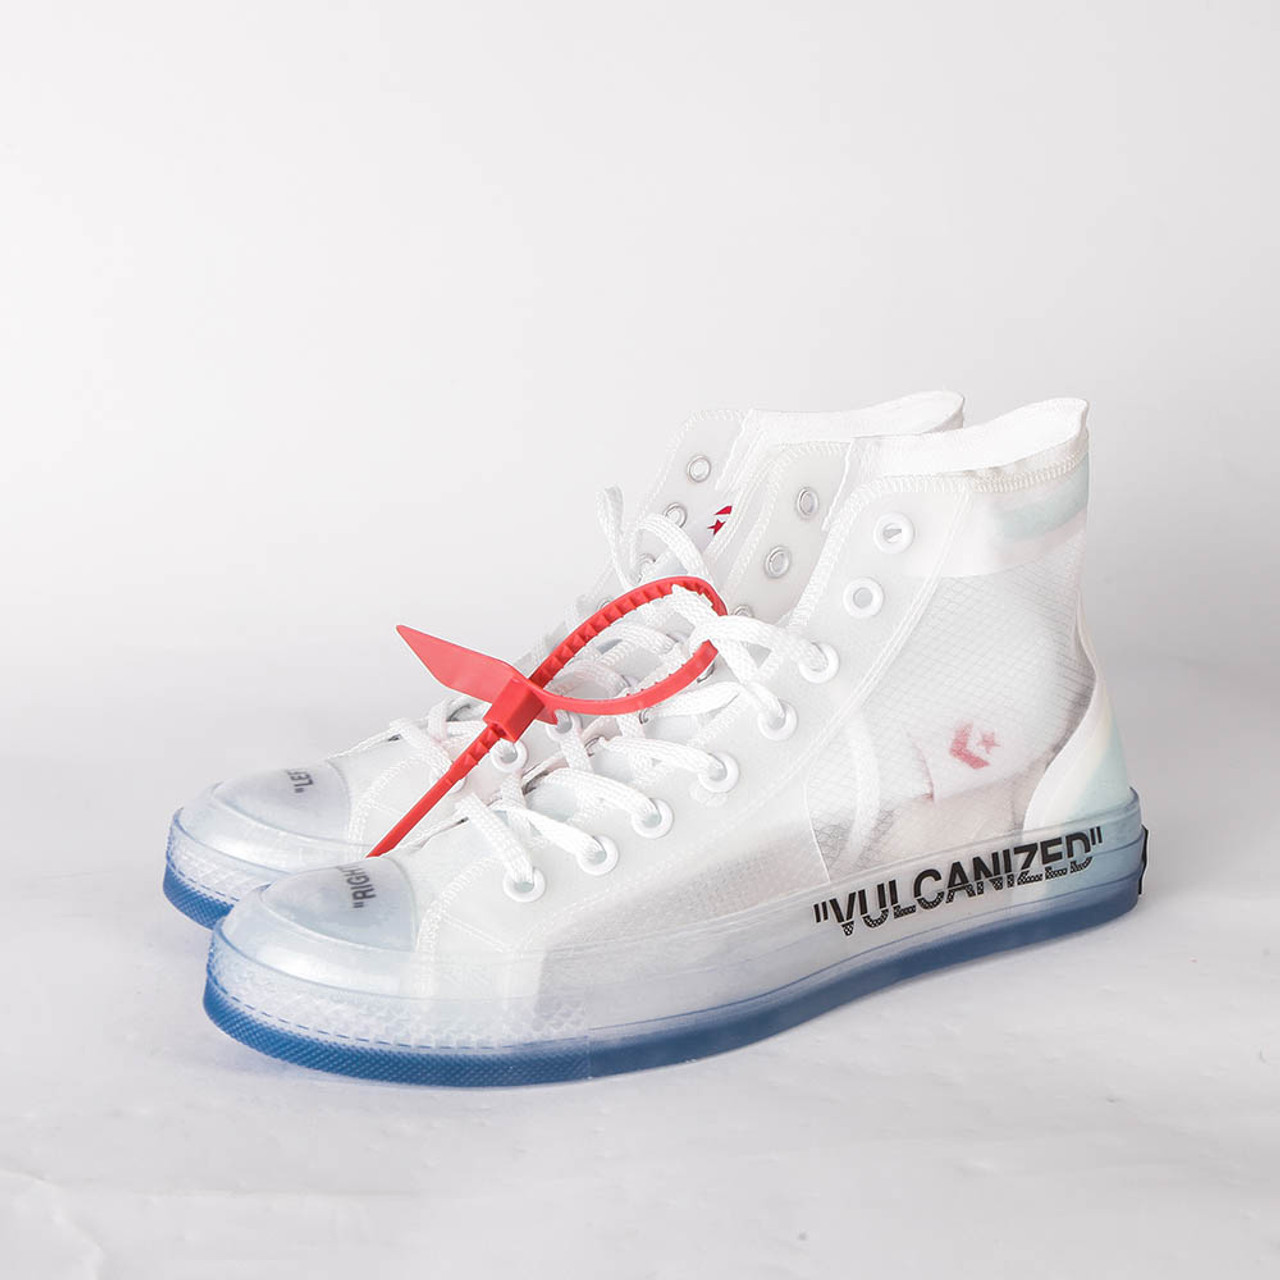 where to buy the best stockX UA High quality replica off-white x nike converse chuck taylor vulcanize all white see through sneakers Hypedripz is the best high quality trusted clone